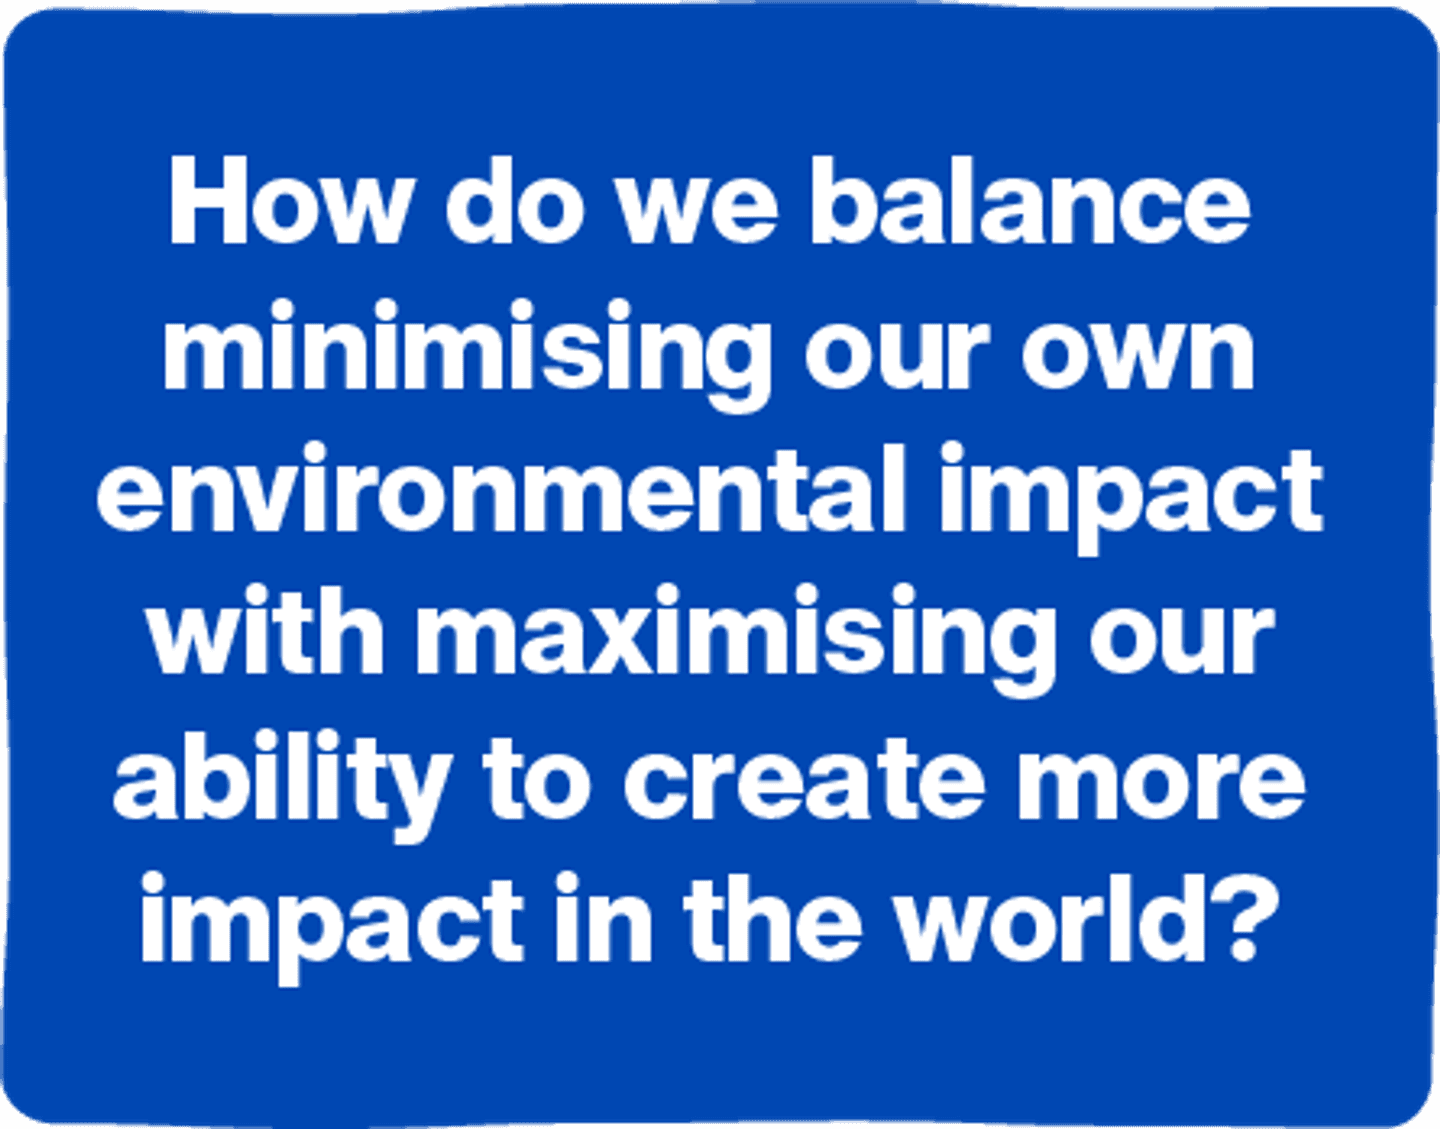 How do we balance minimising our own environmental impact with maximising our ability to create more impact in the world?